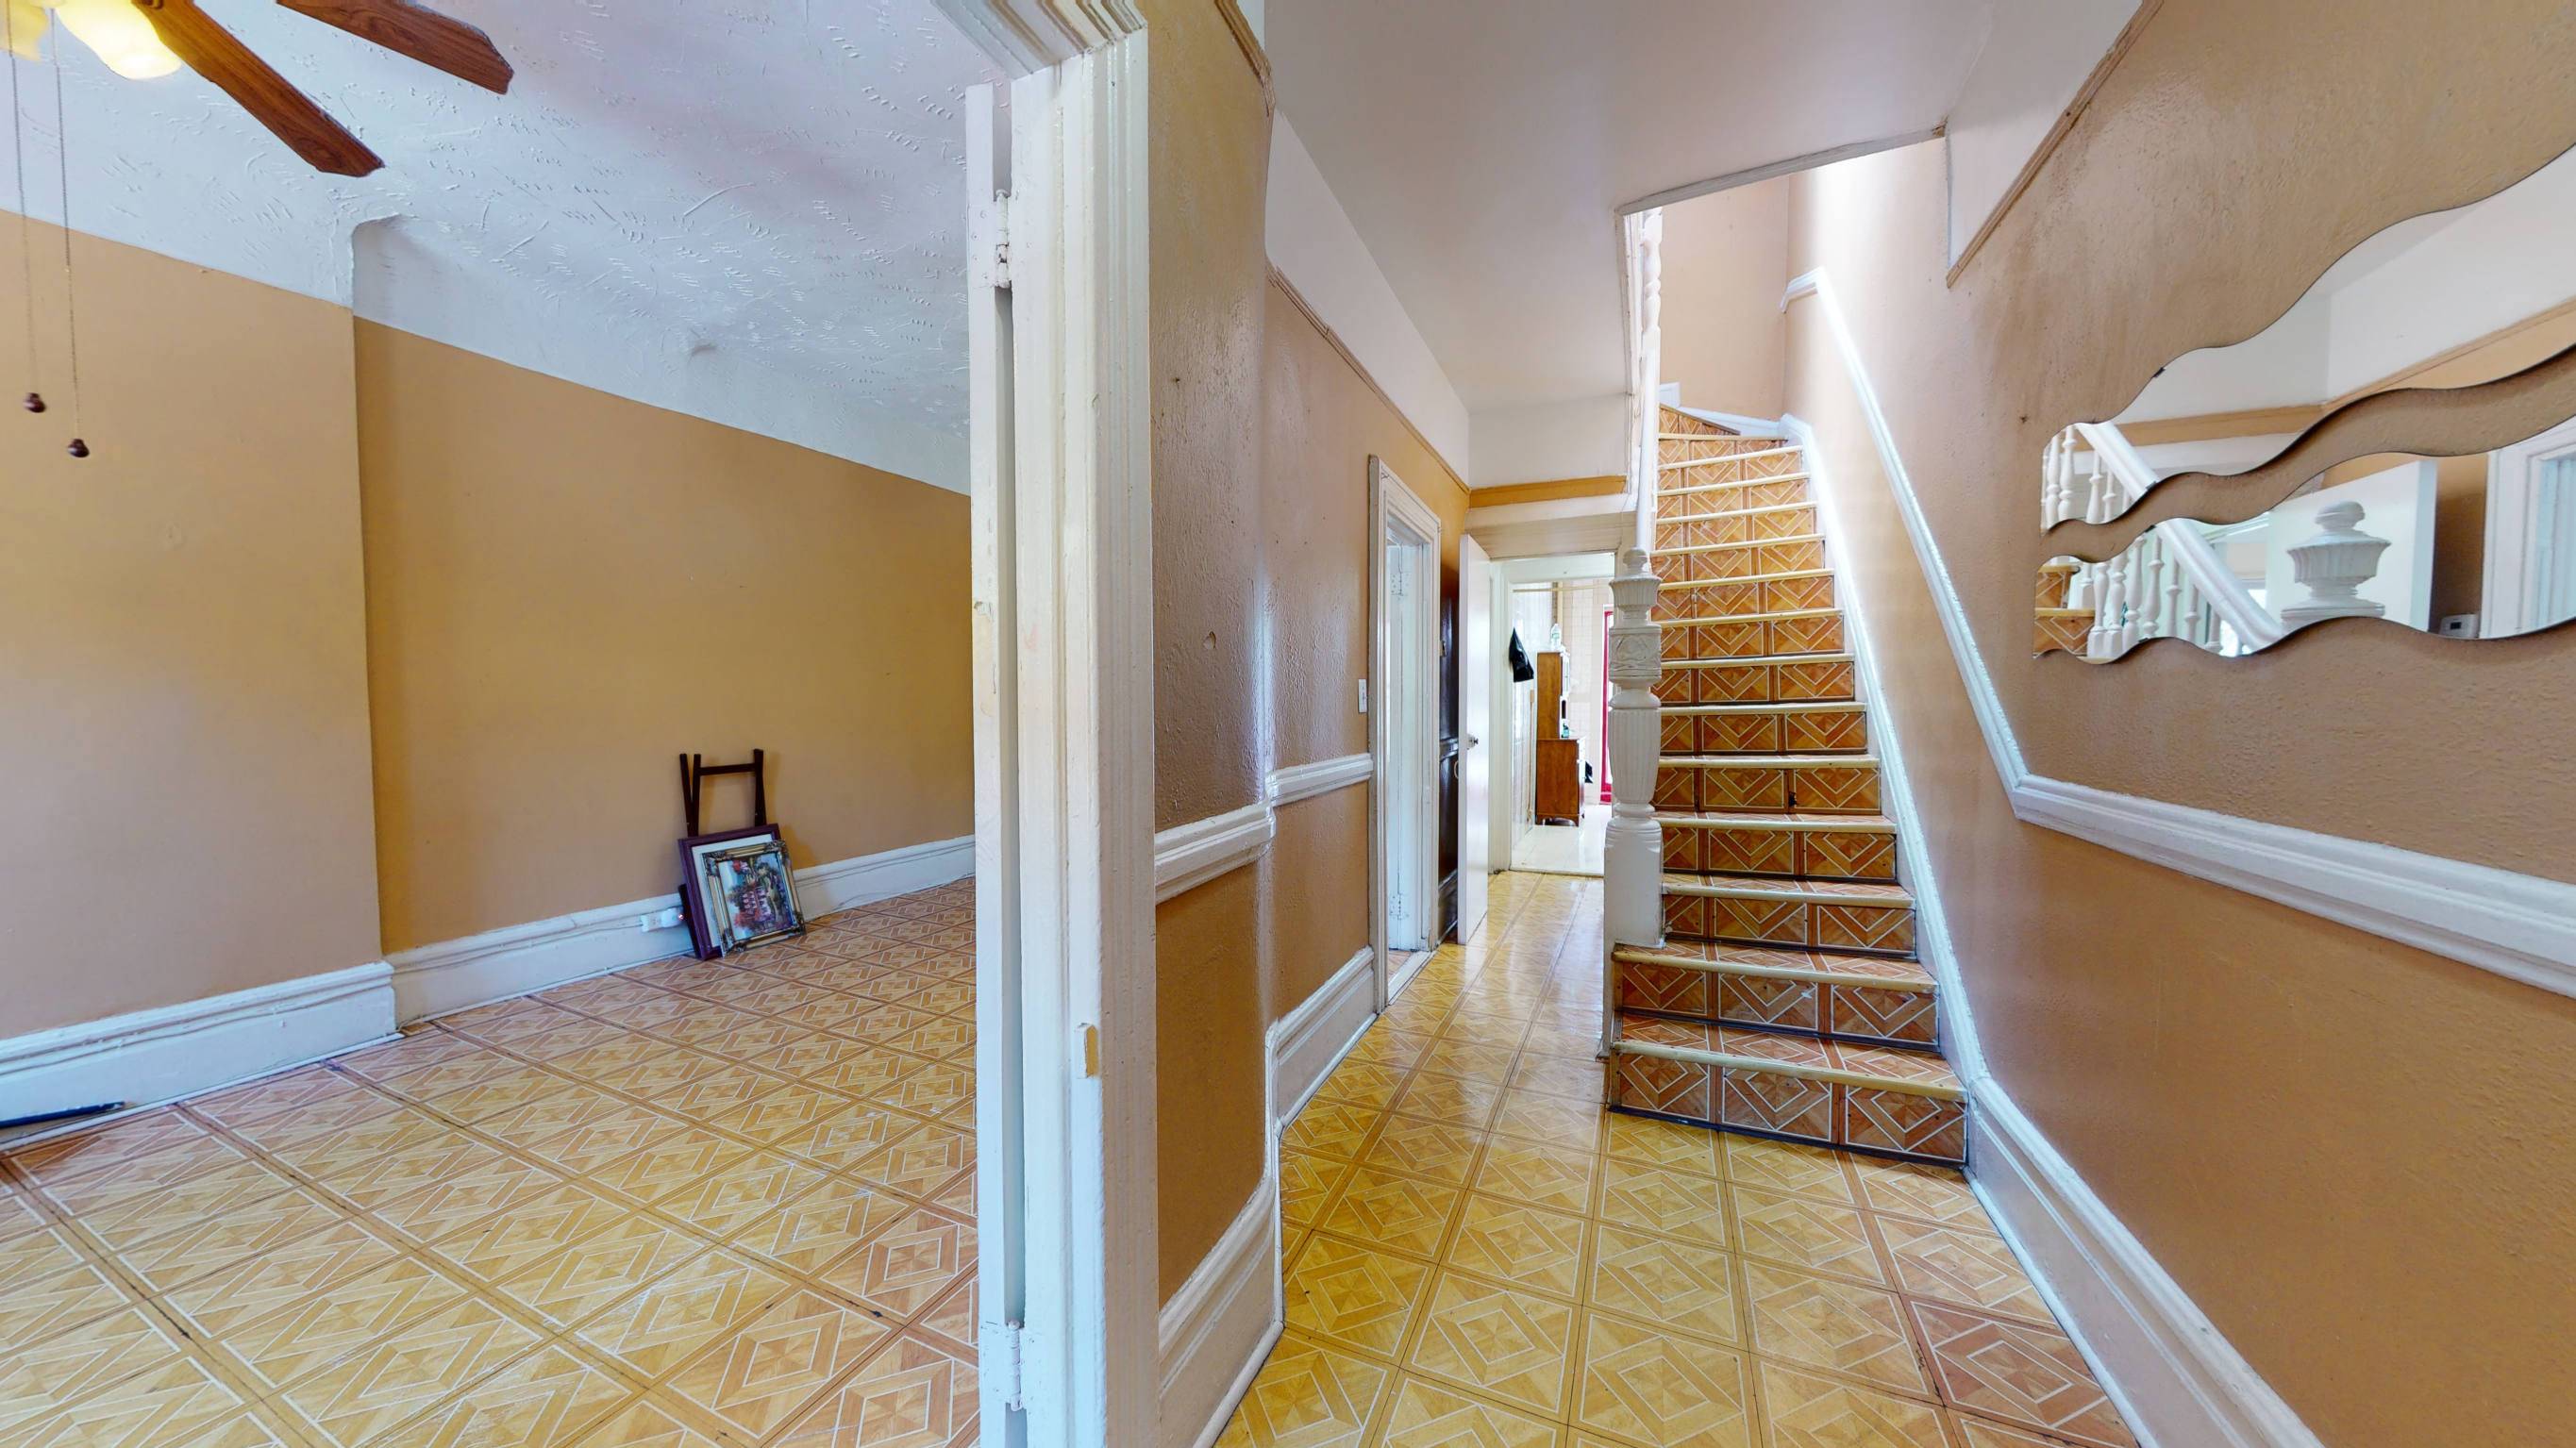 Come to Washington Heights with your inspiration, contractor, and architect to view this 1899 two family townhouse converted from a one family B3 on Audubon Avenue between West 184th Street ...